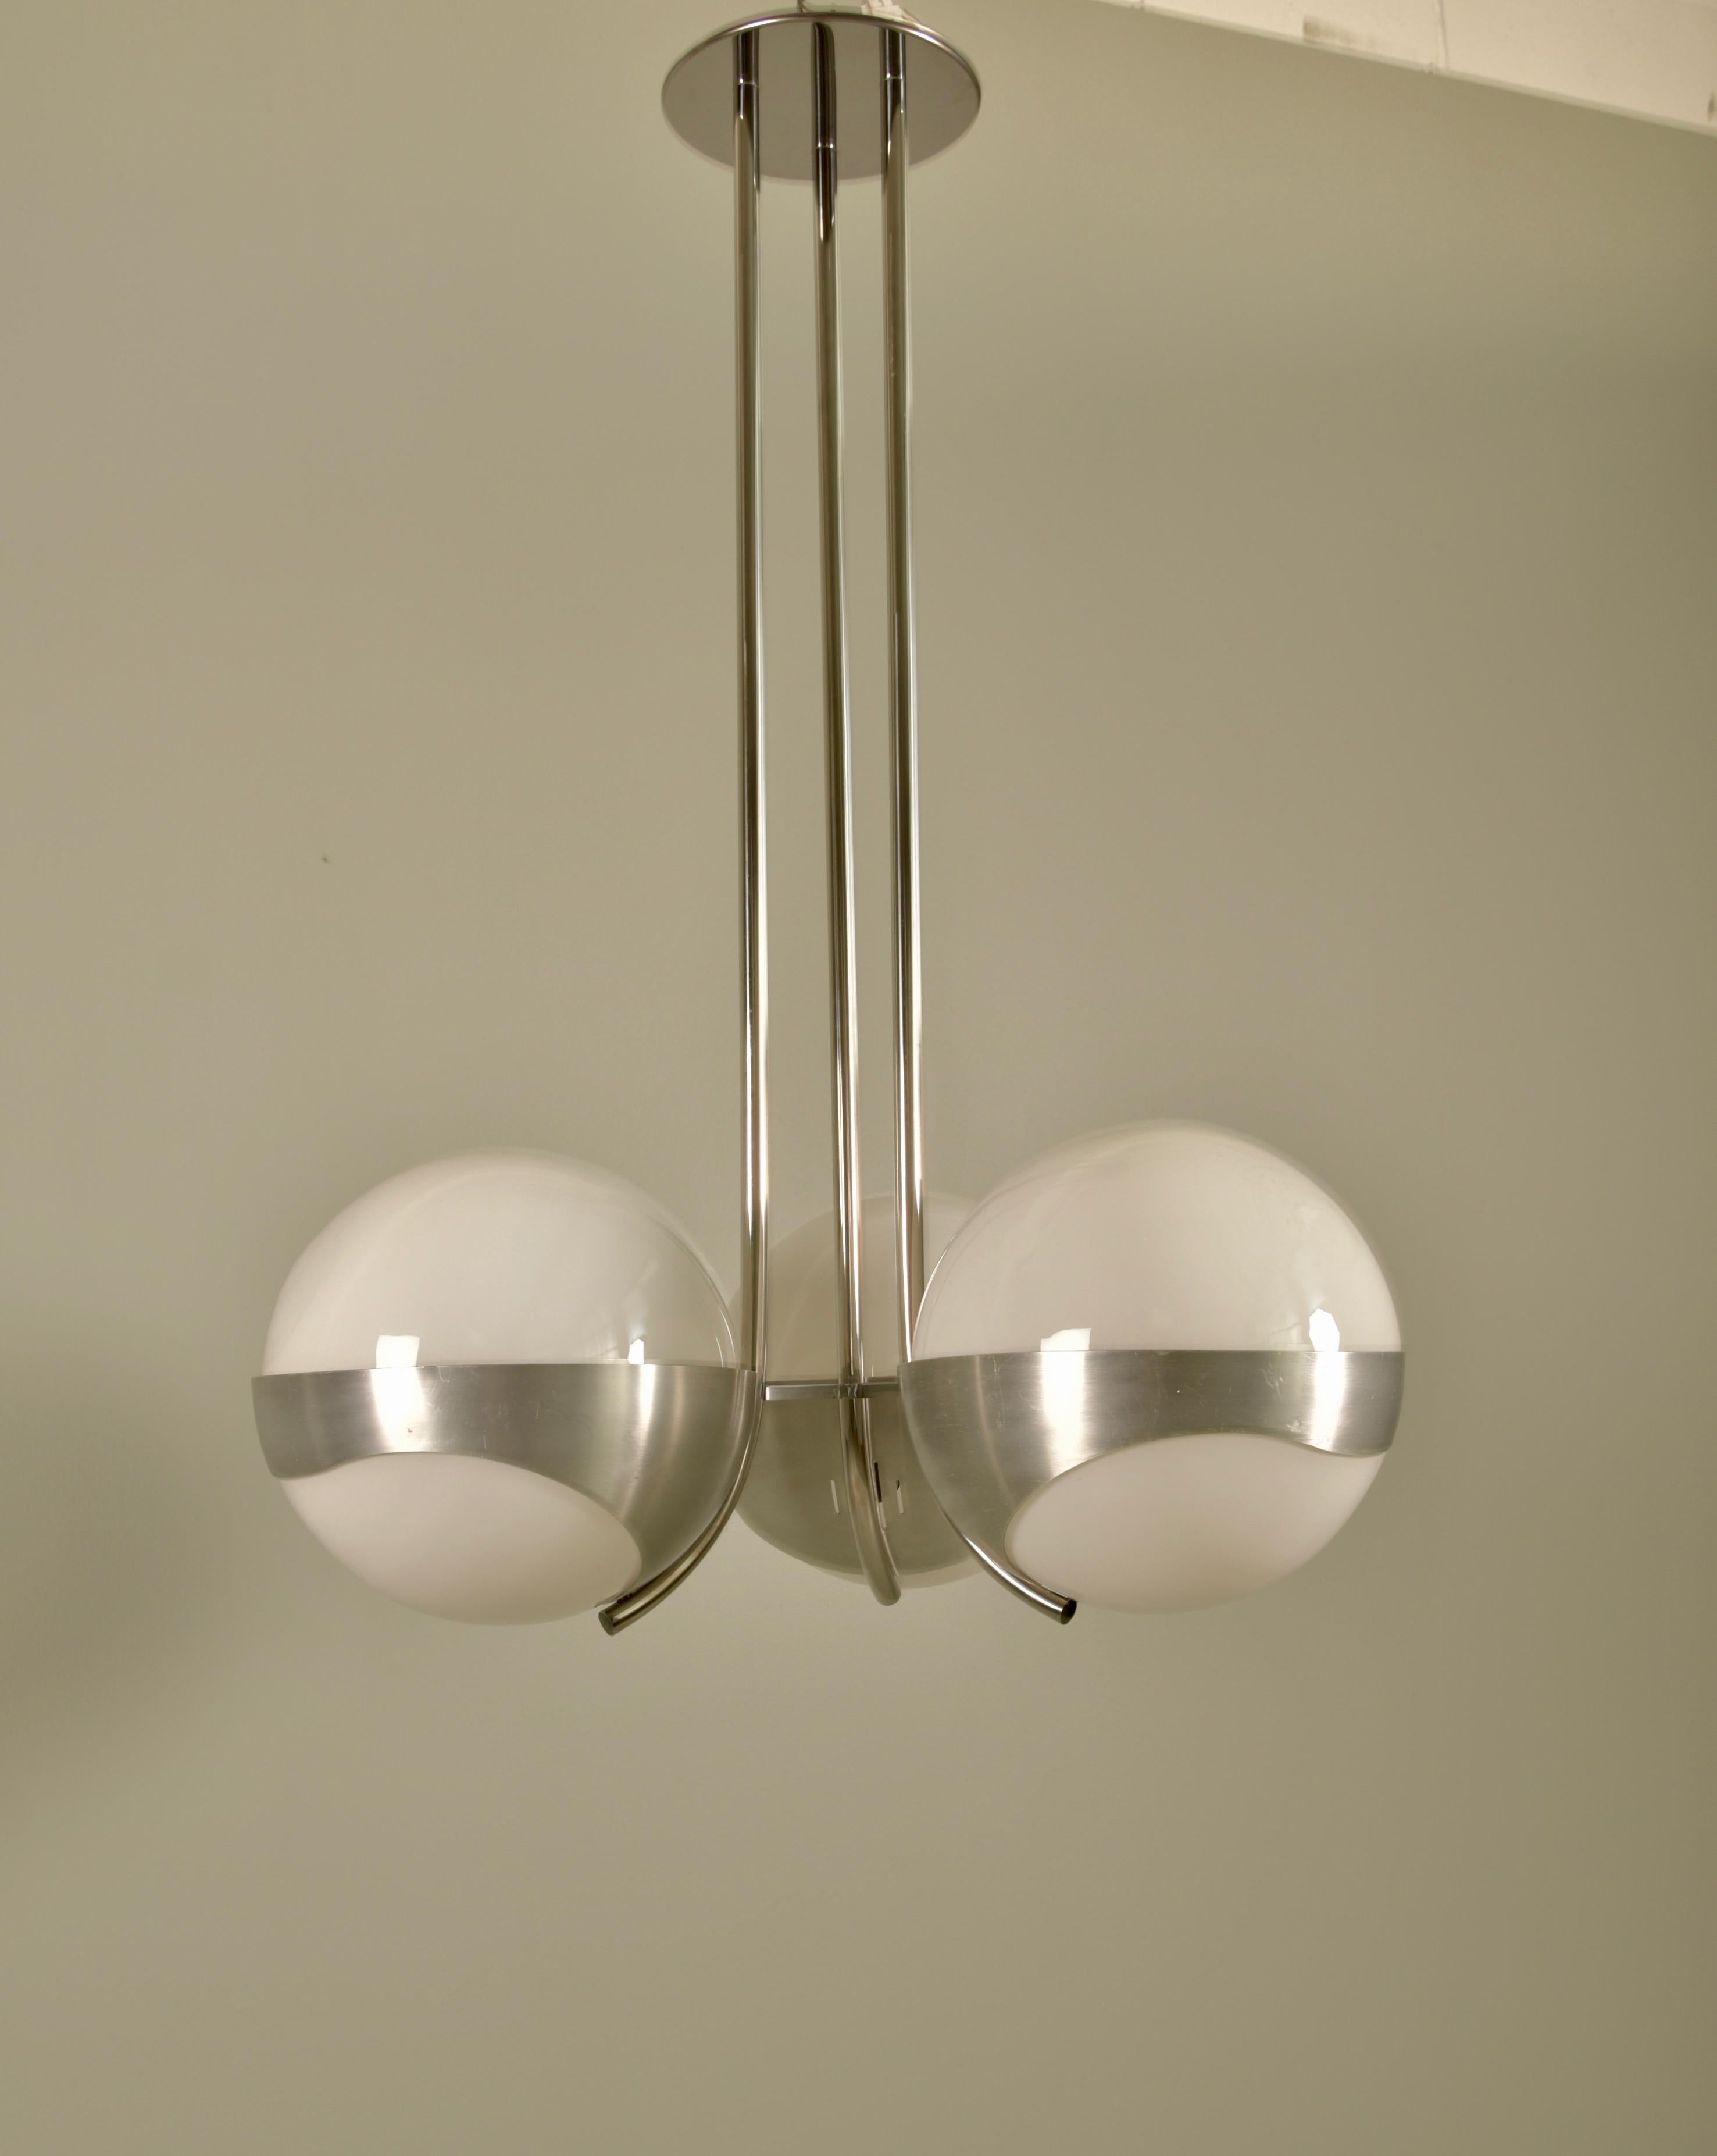 An original Space Age 1970s Italian pendant chandelier composed of brushed and polished steel frame an large white opaline glass globes.